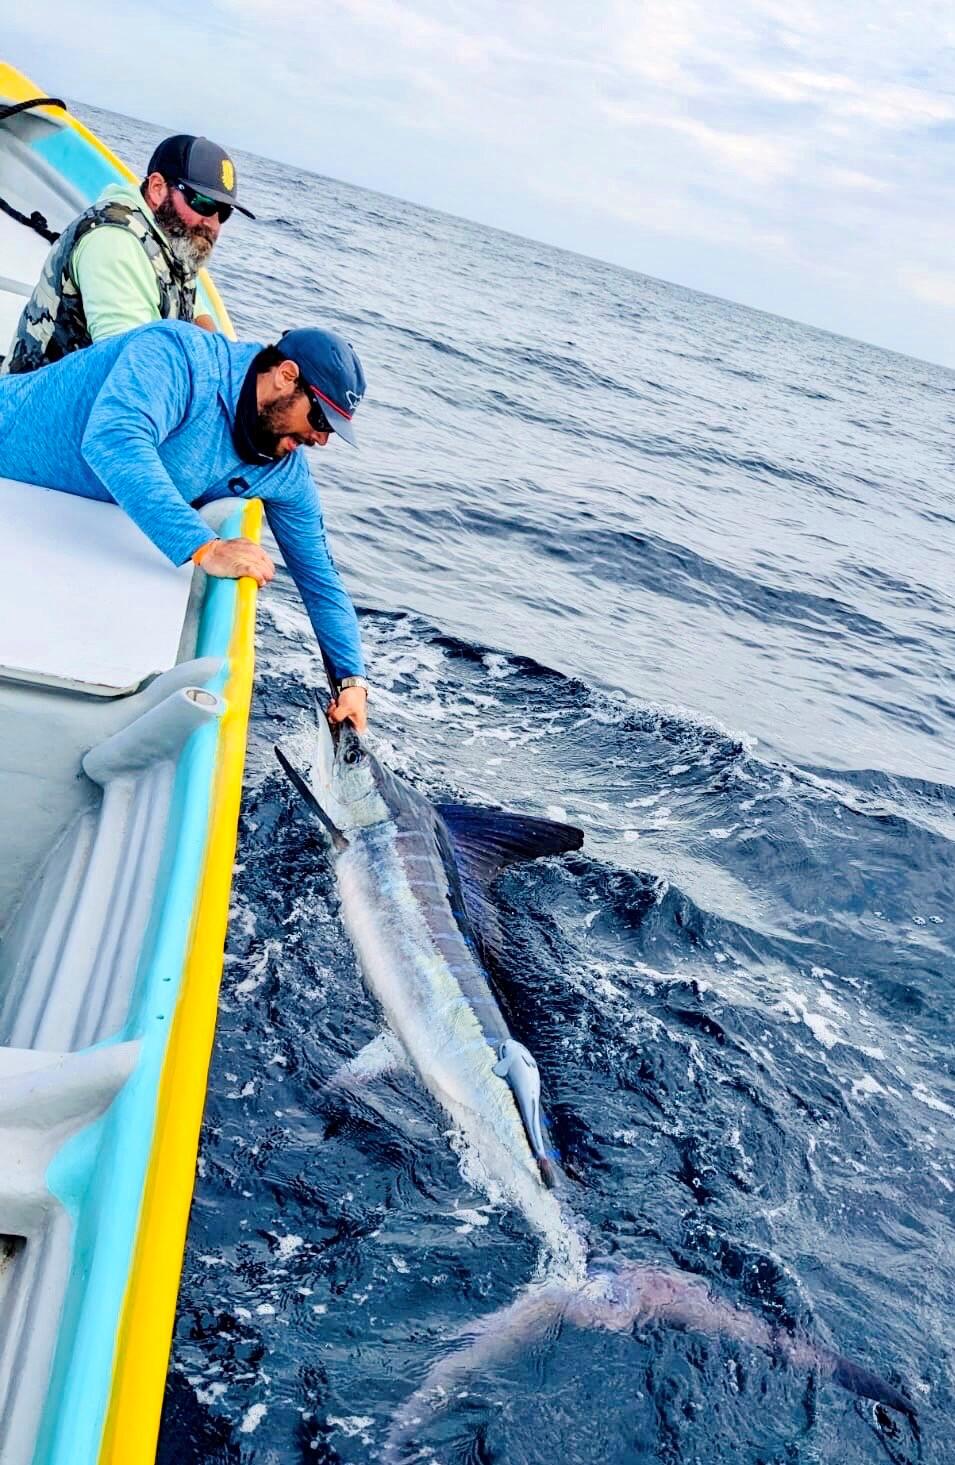 Sonoma fly-fishing guide and chef, Patrick MacKenzie, was part of the Costa Sunglasses Team that was catching and tagging striped marlin near Magdalena Bay, Mexico last month. (MacKenzie On The Fly Photo)